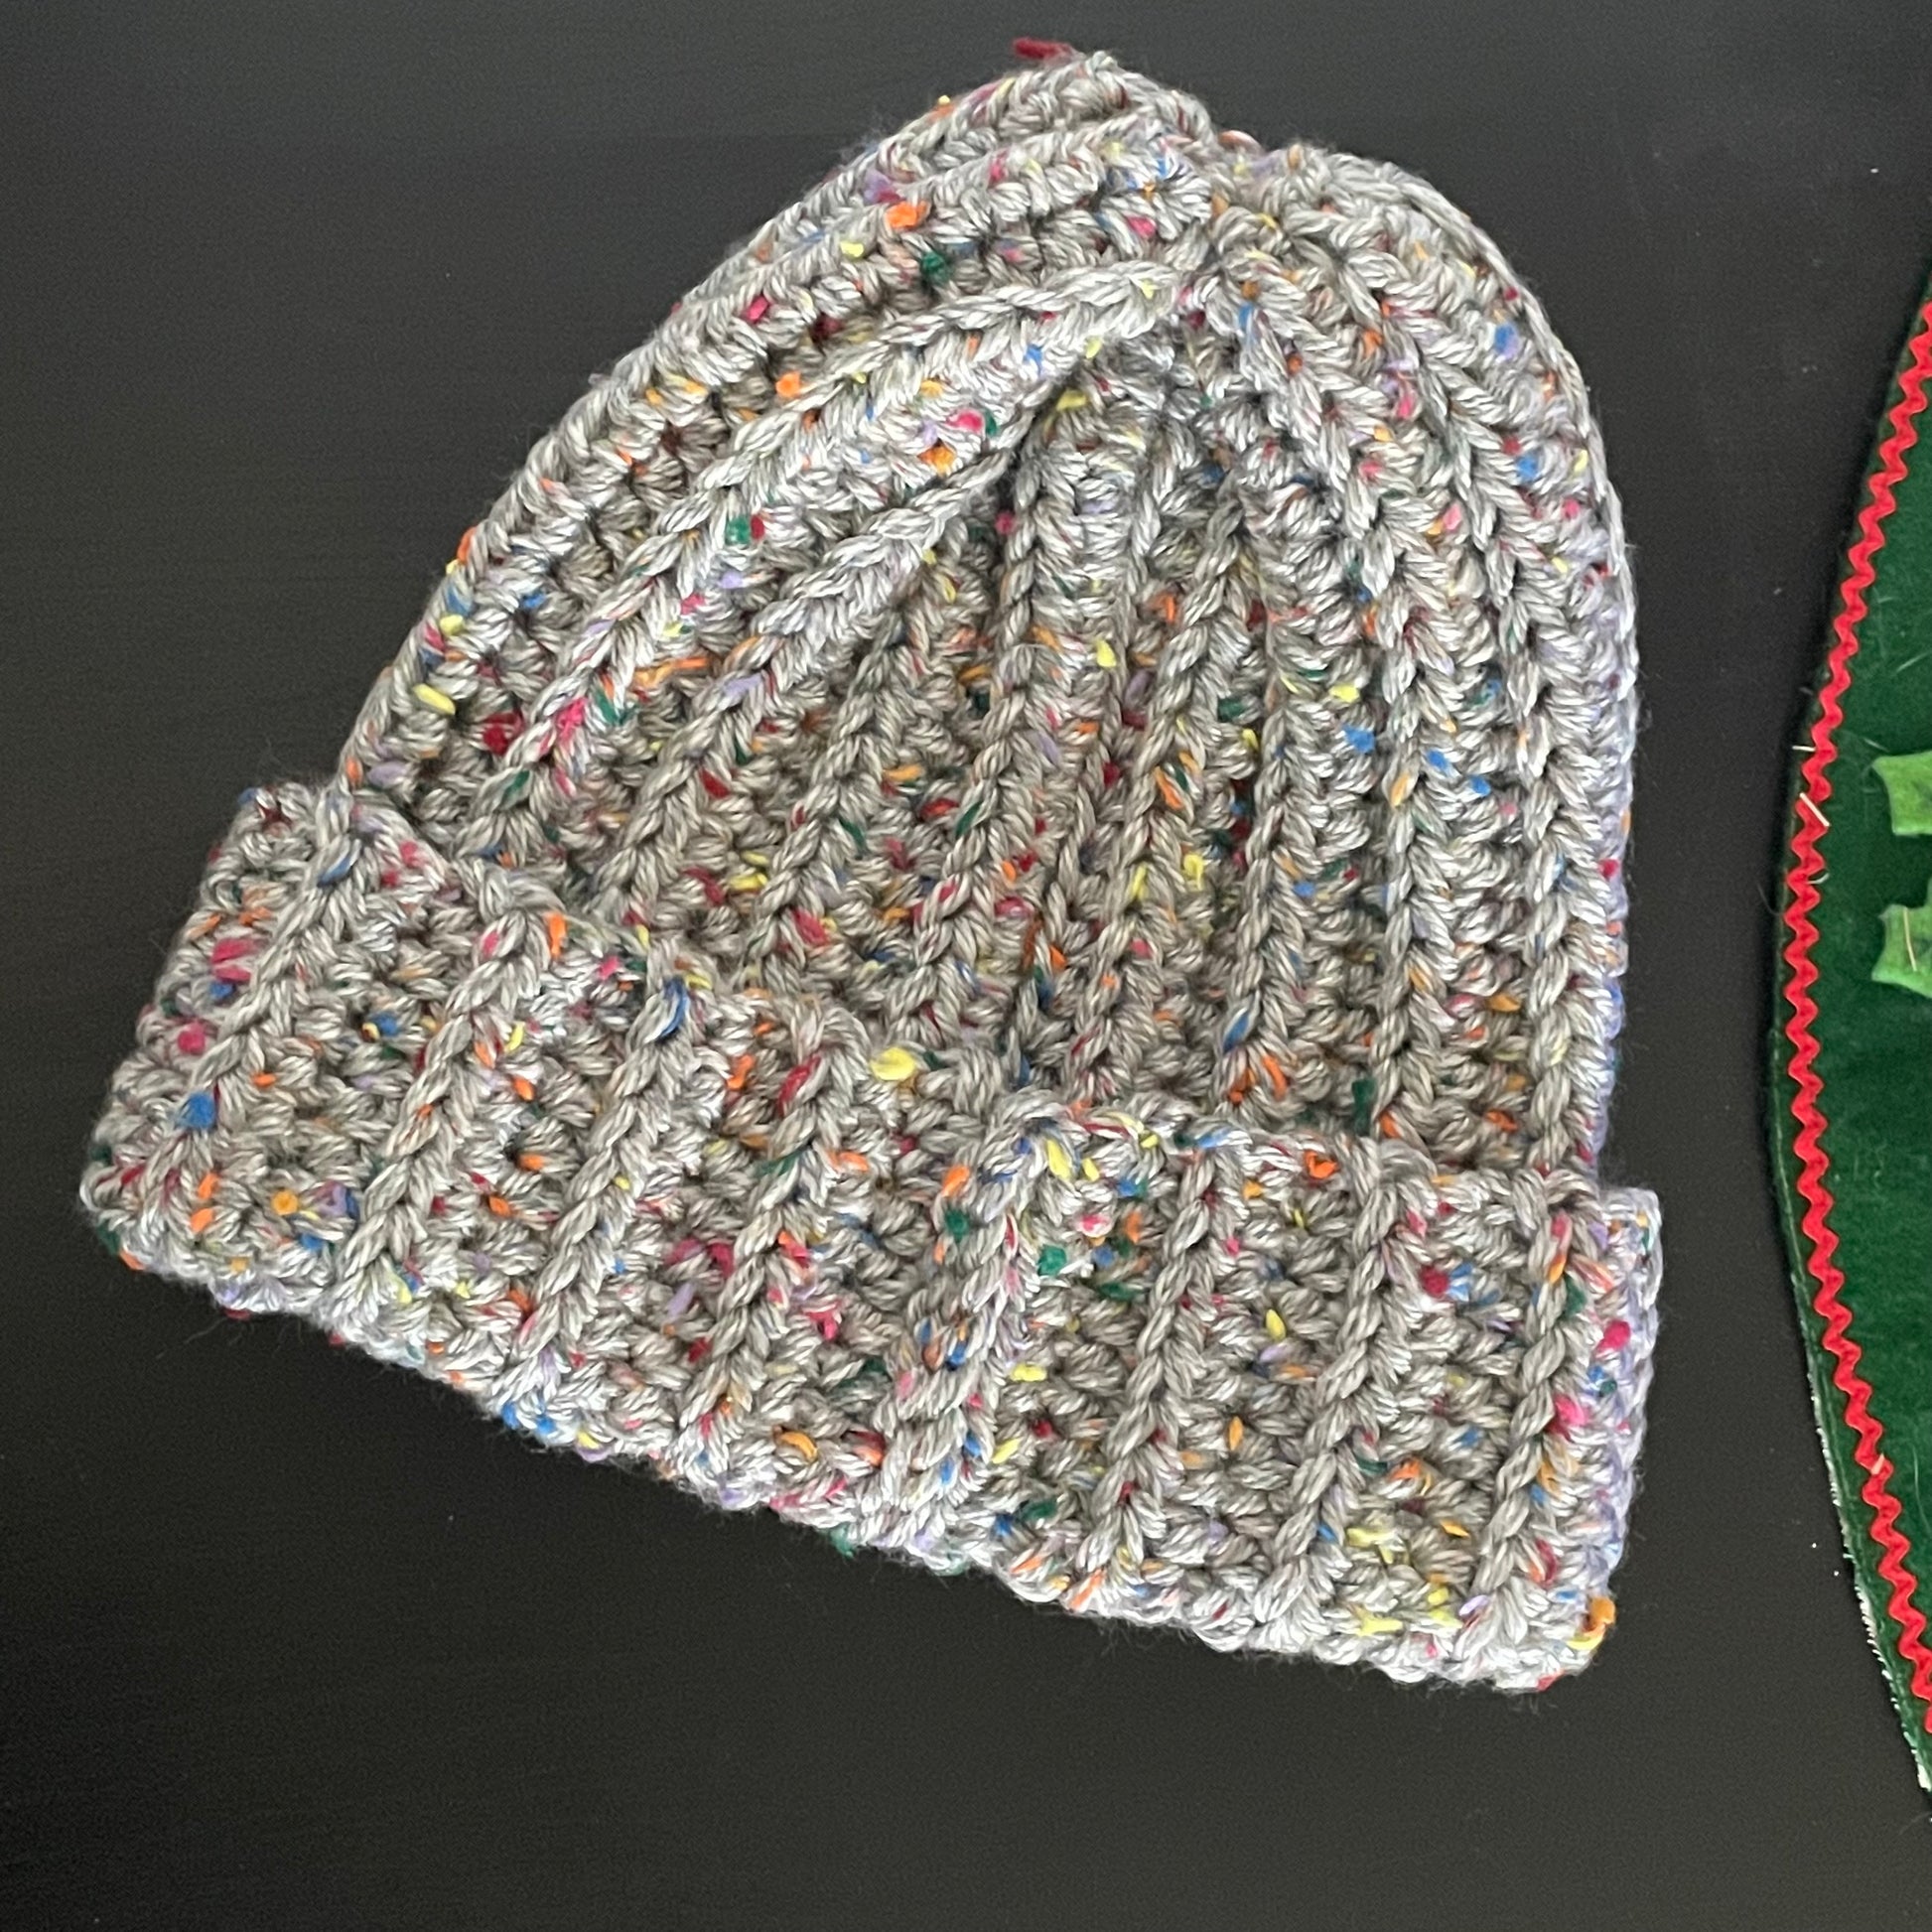 Extra Warm Ribbed Cable Knit Hat Silver & Speckled Rainbow Hand Crocheted Beanie Winter Unisex Outdoor Stretch Adjustable Cuff displayed flat on black table